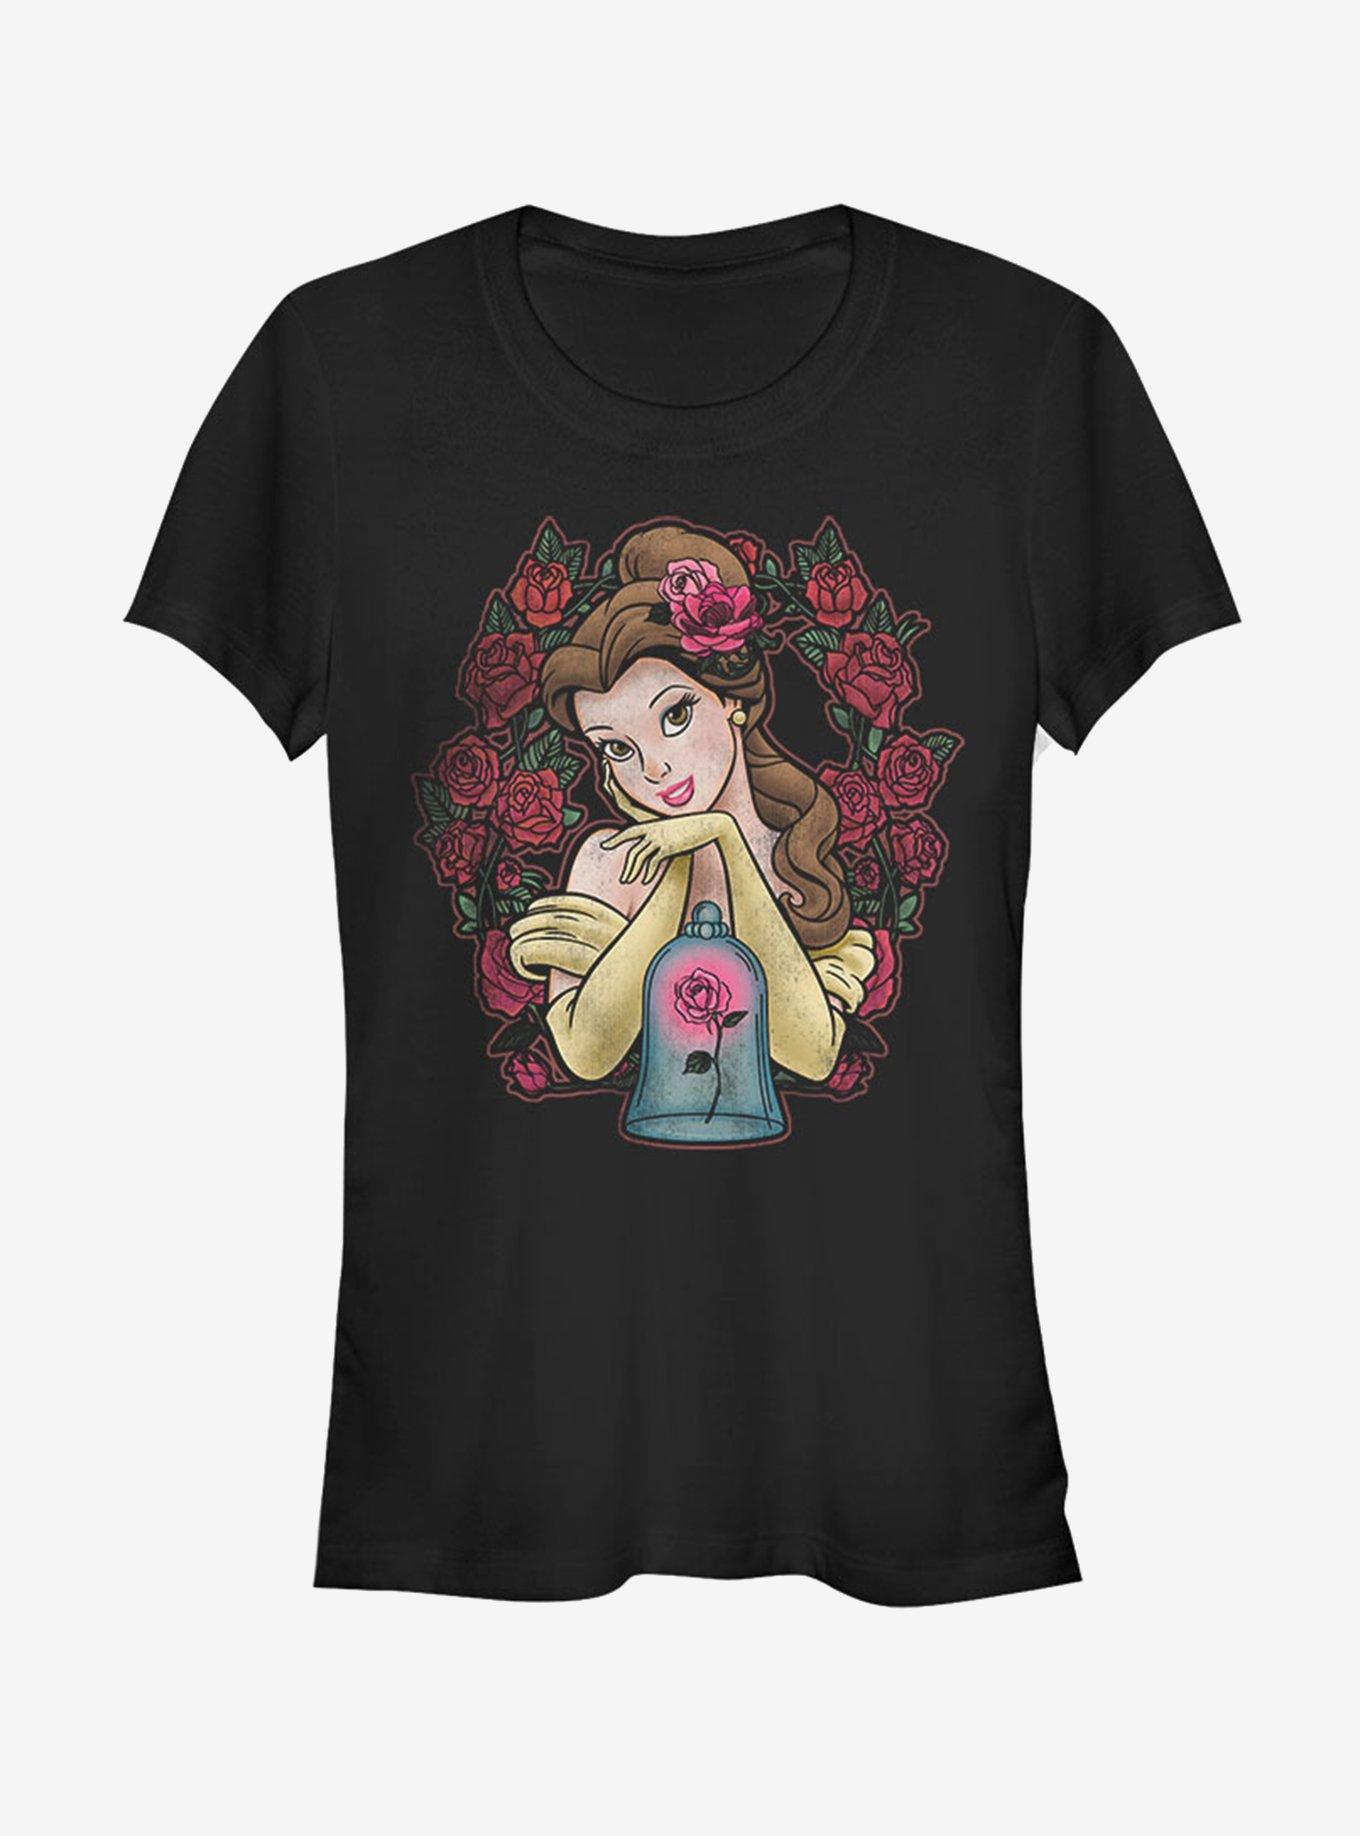 Disney Beauty And The Beast Rose Belle Girls T-Shirt, , hi-res